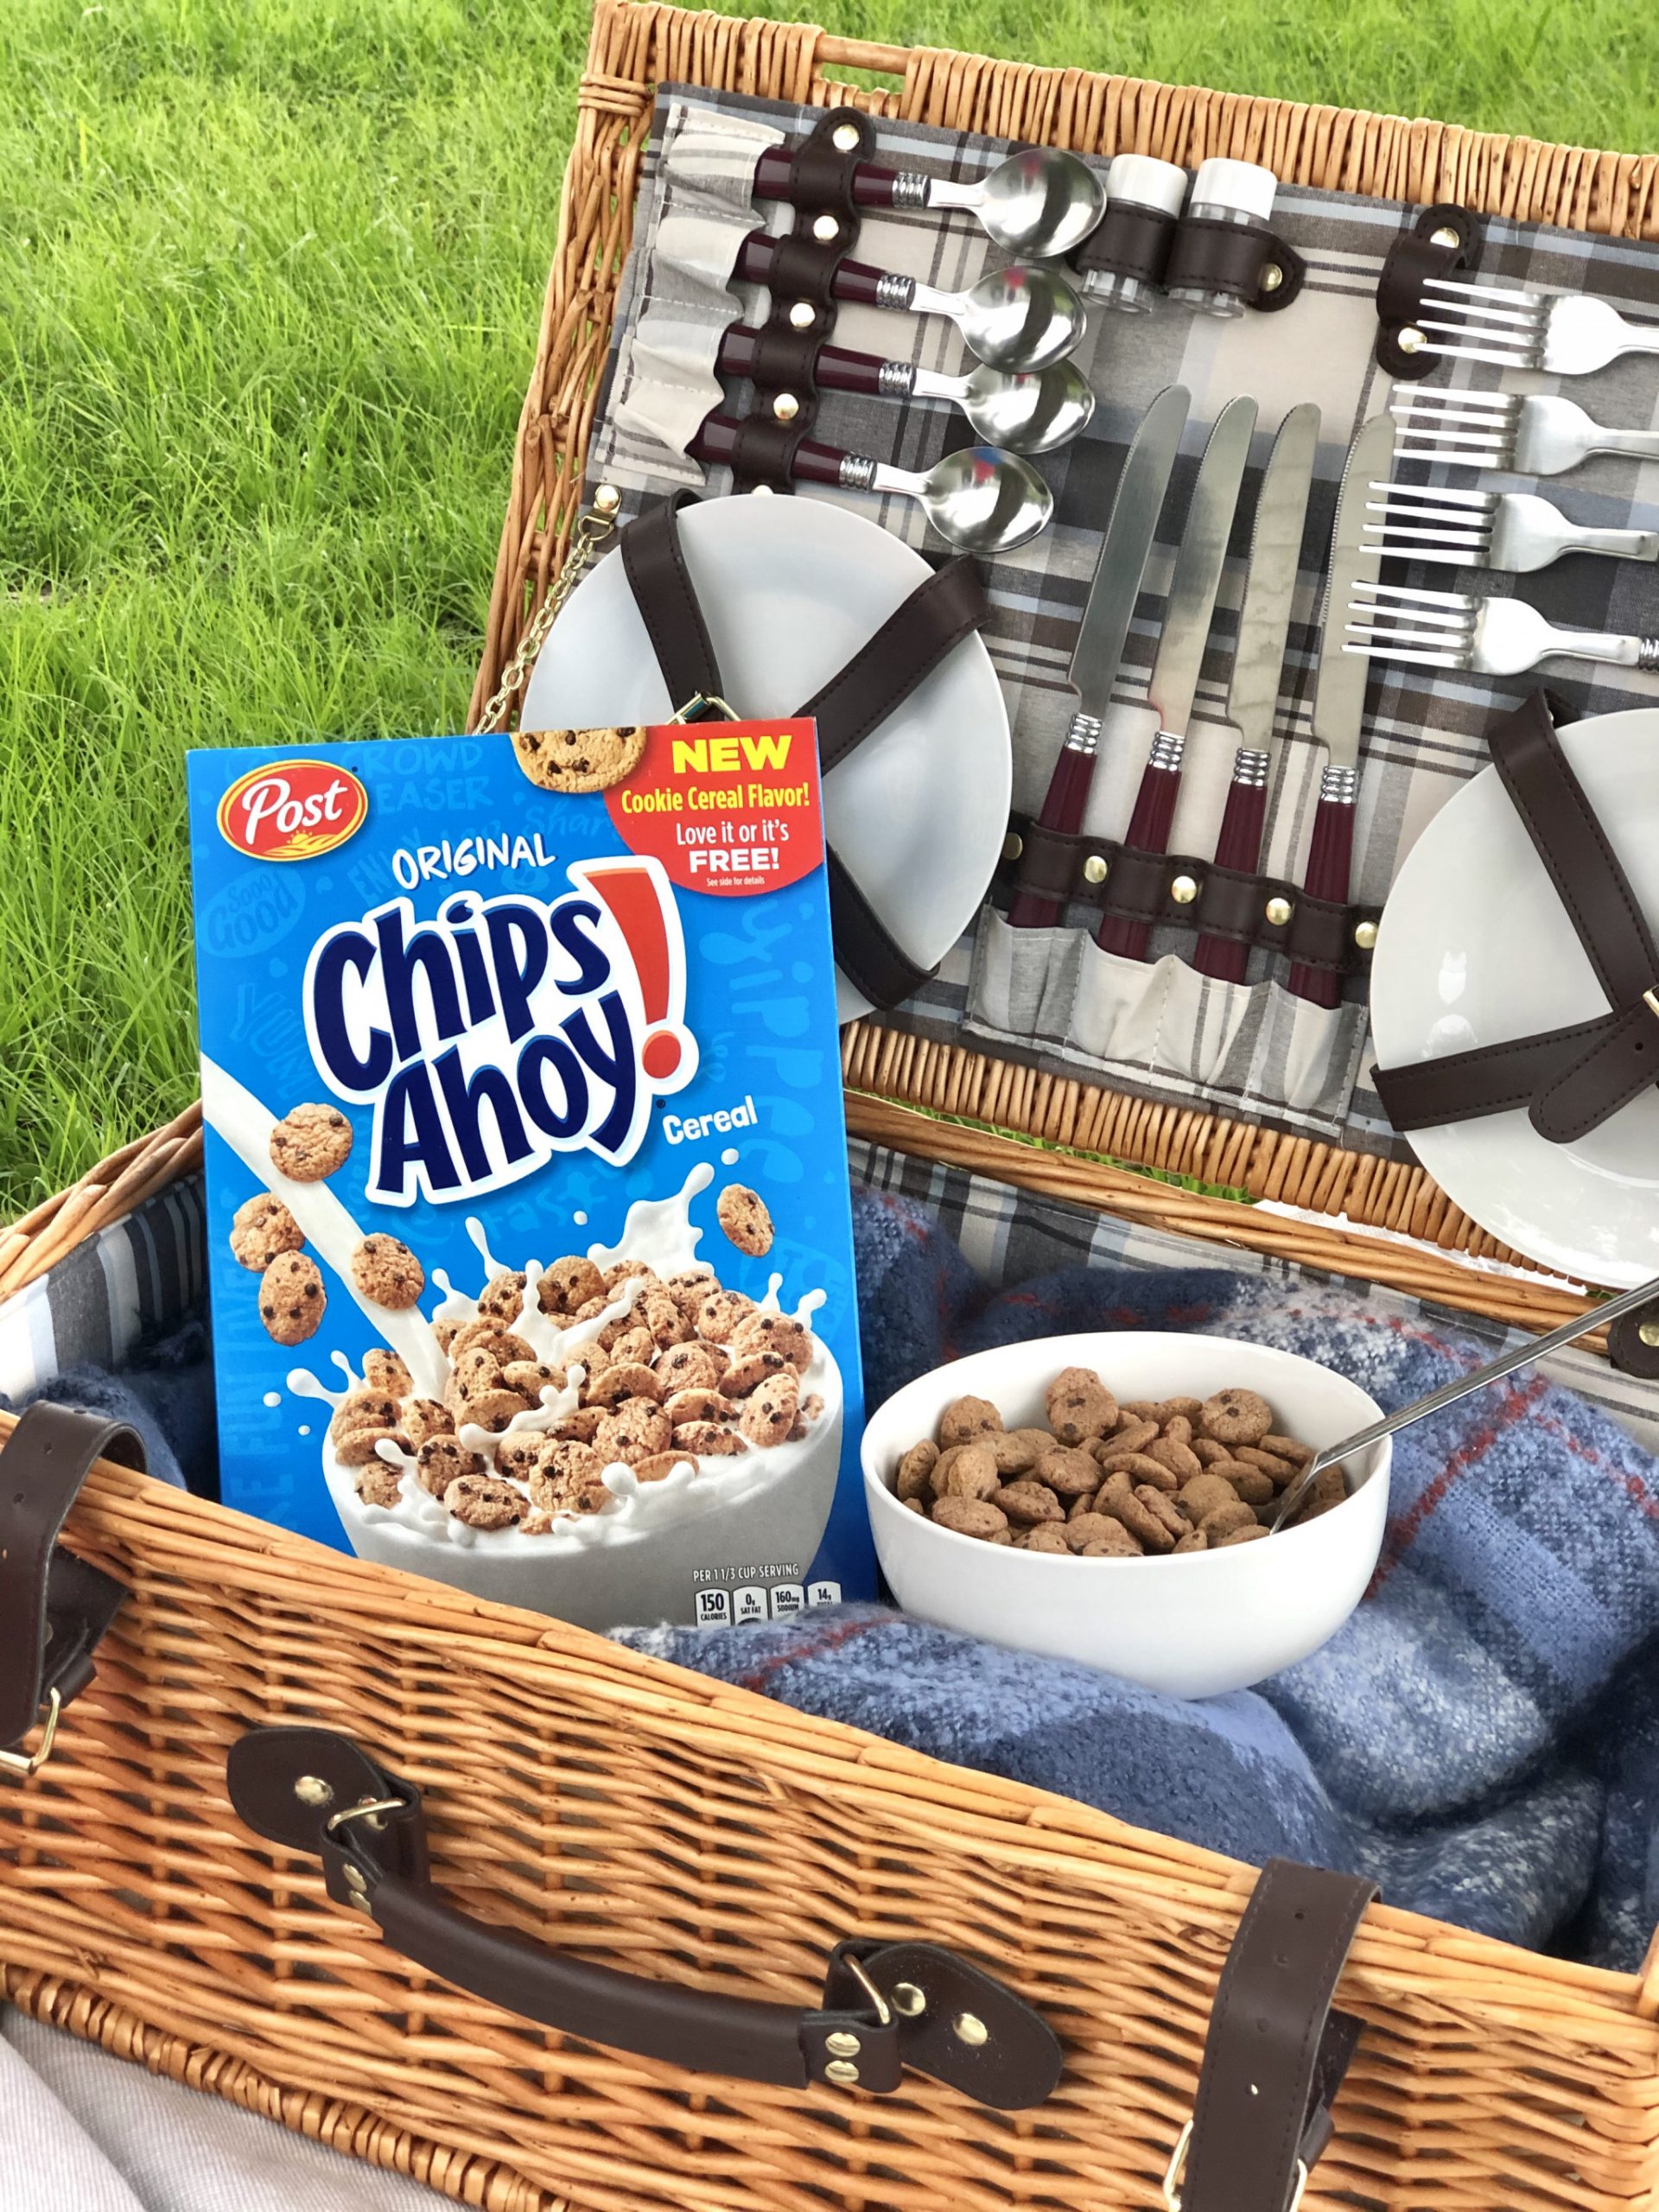 Cereal breakfast picnic with Chips! Ahoy